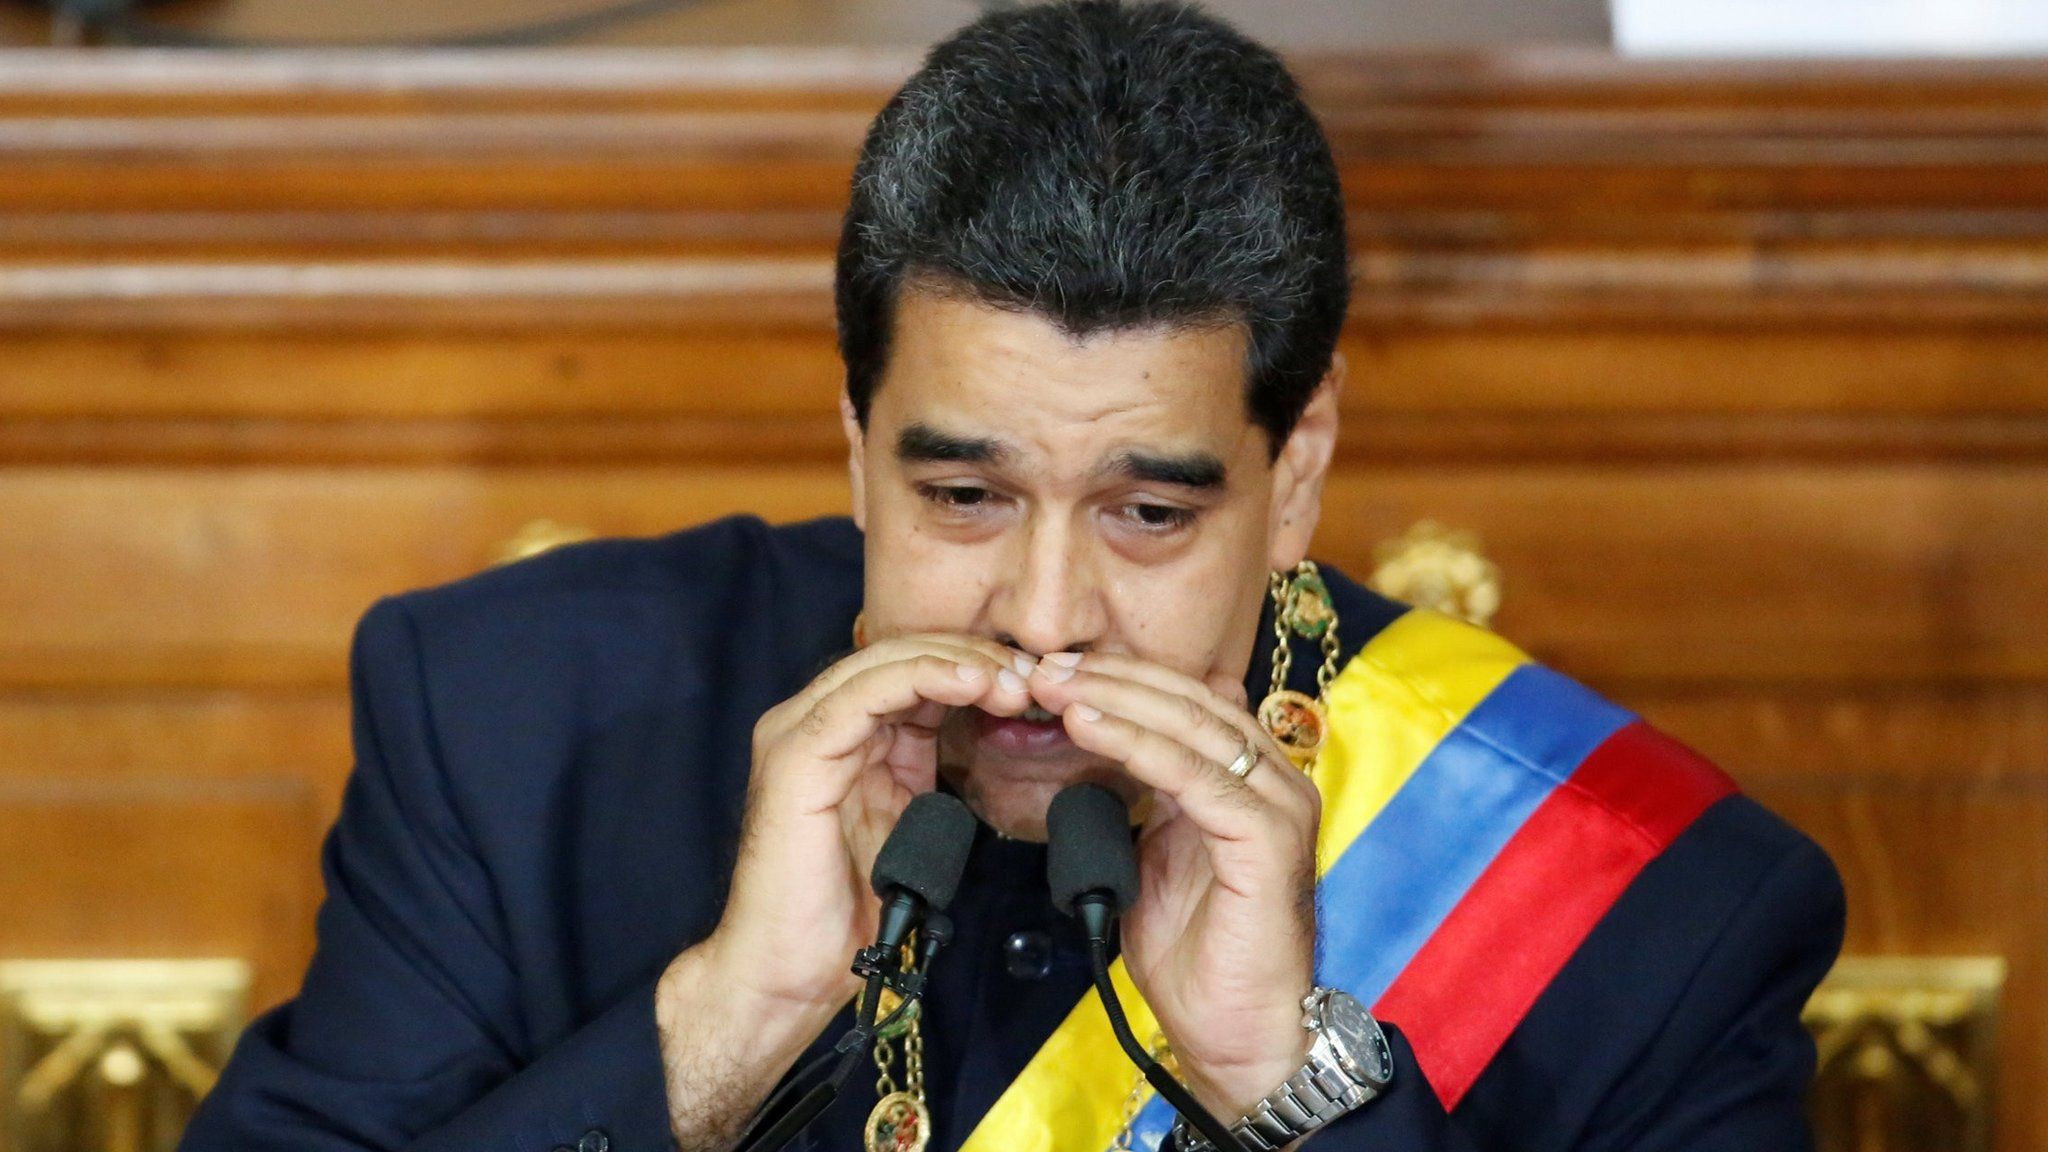 Venezuela's Presidente Nicolas Maduro gestures as he speaks during a session of the National Constituent Assembly